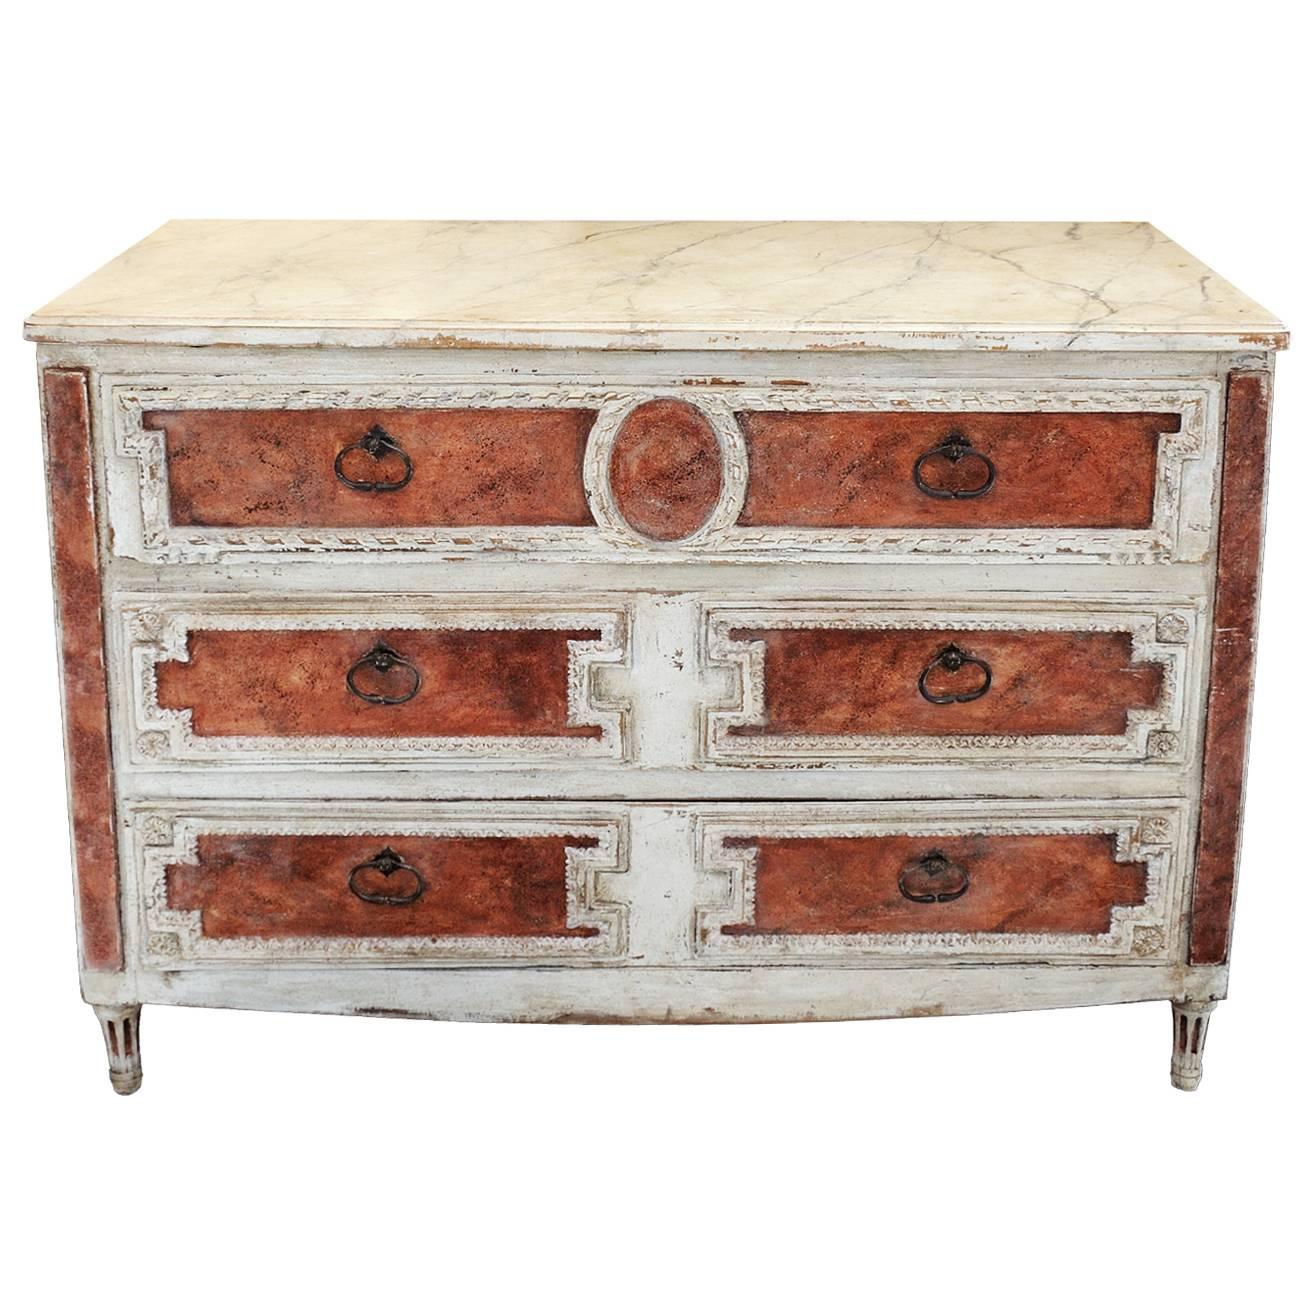 18th Century Neoclassical Painted Italian Commode/Chest of Drawers, circa 1780 For Sale